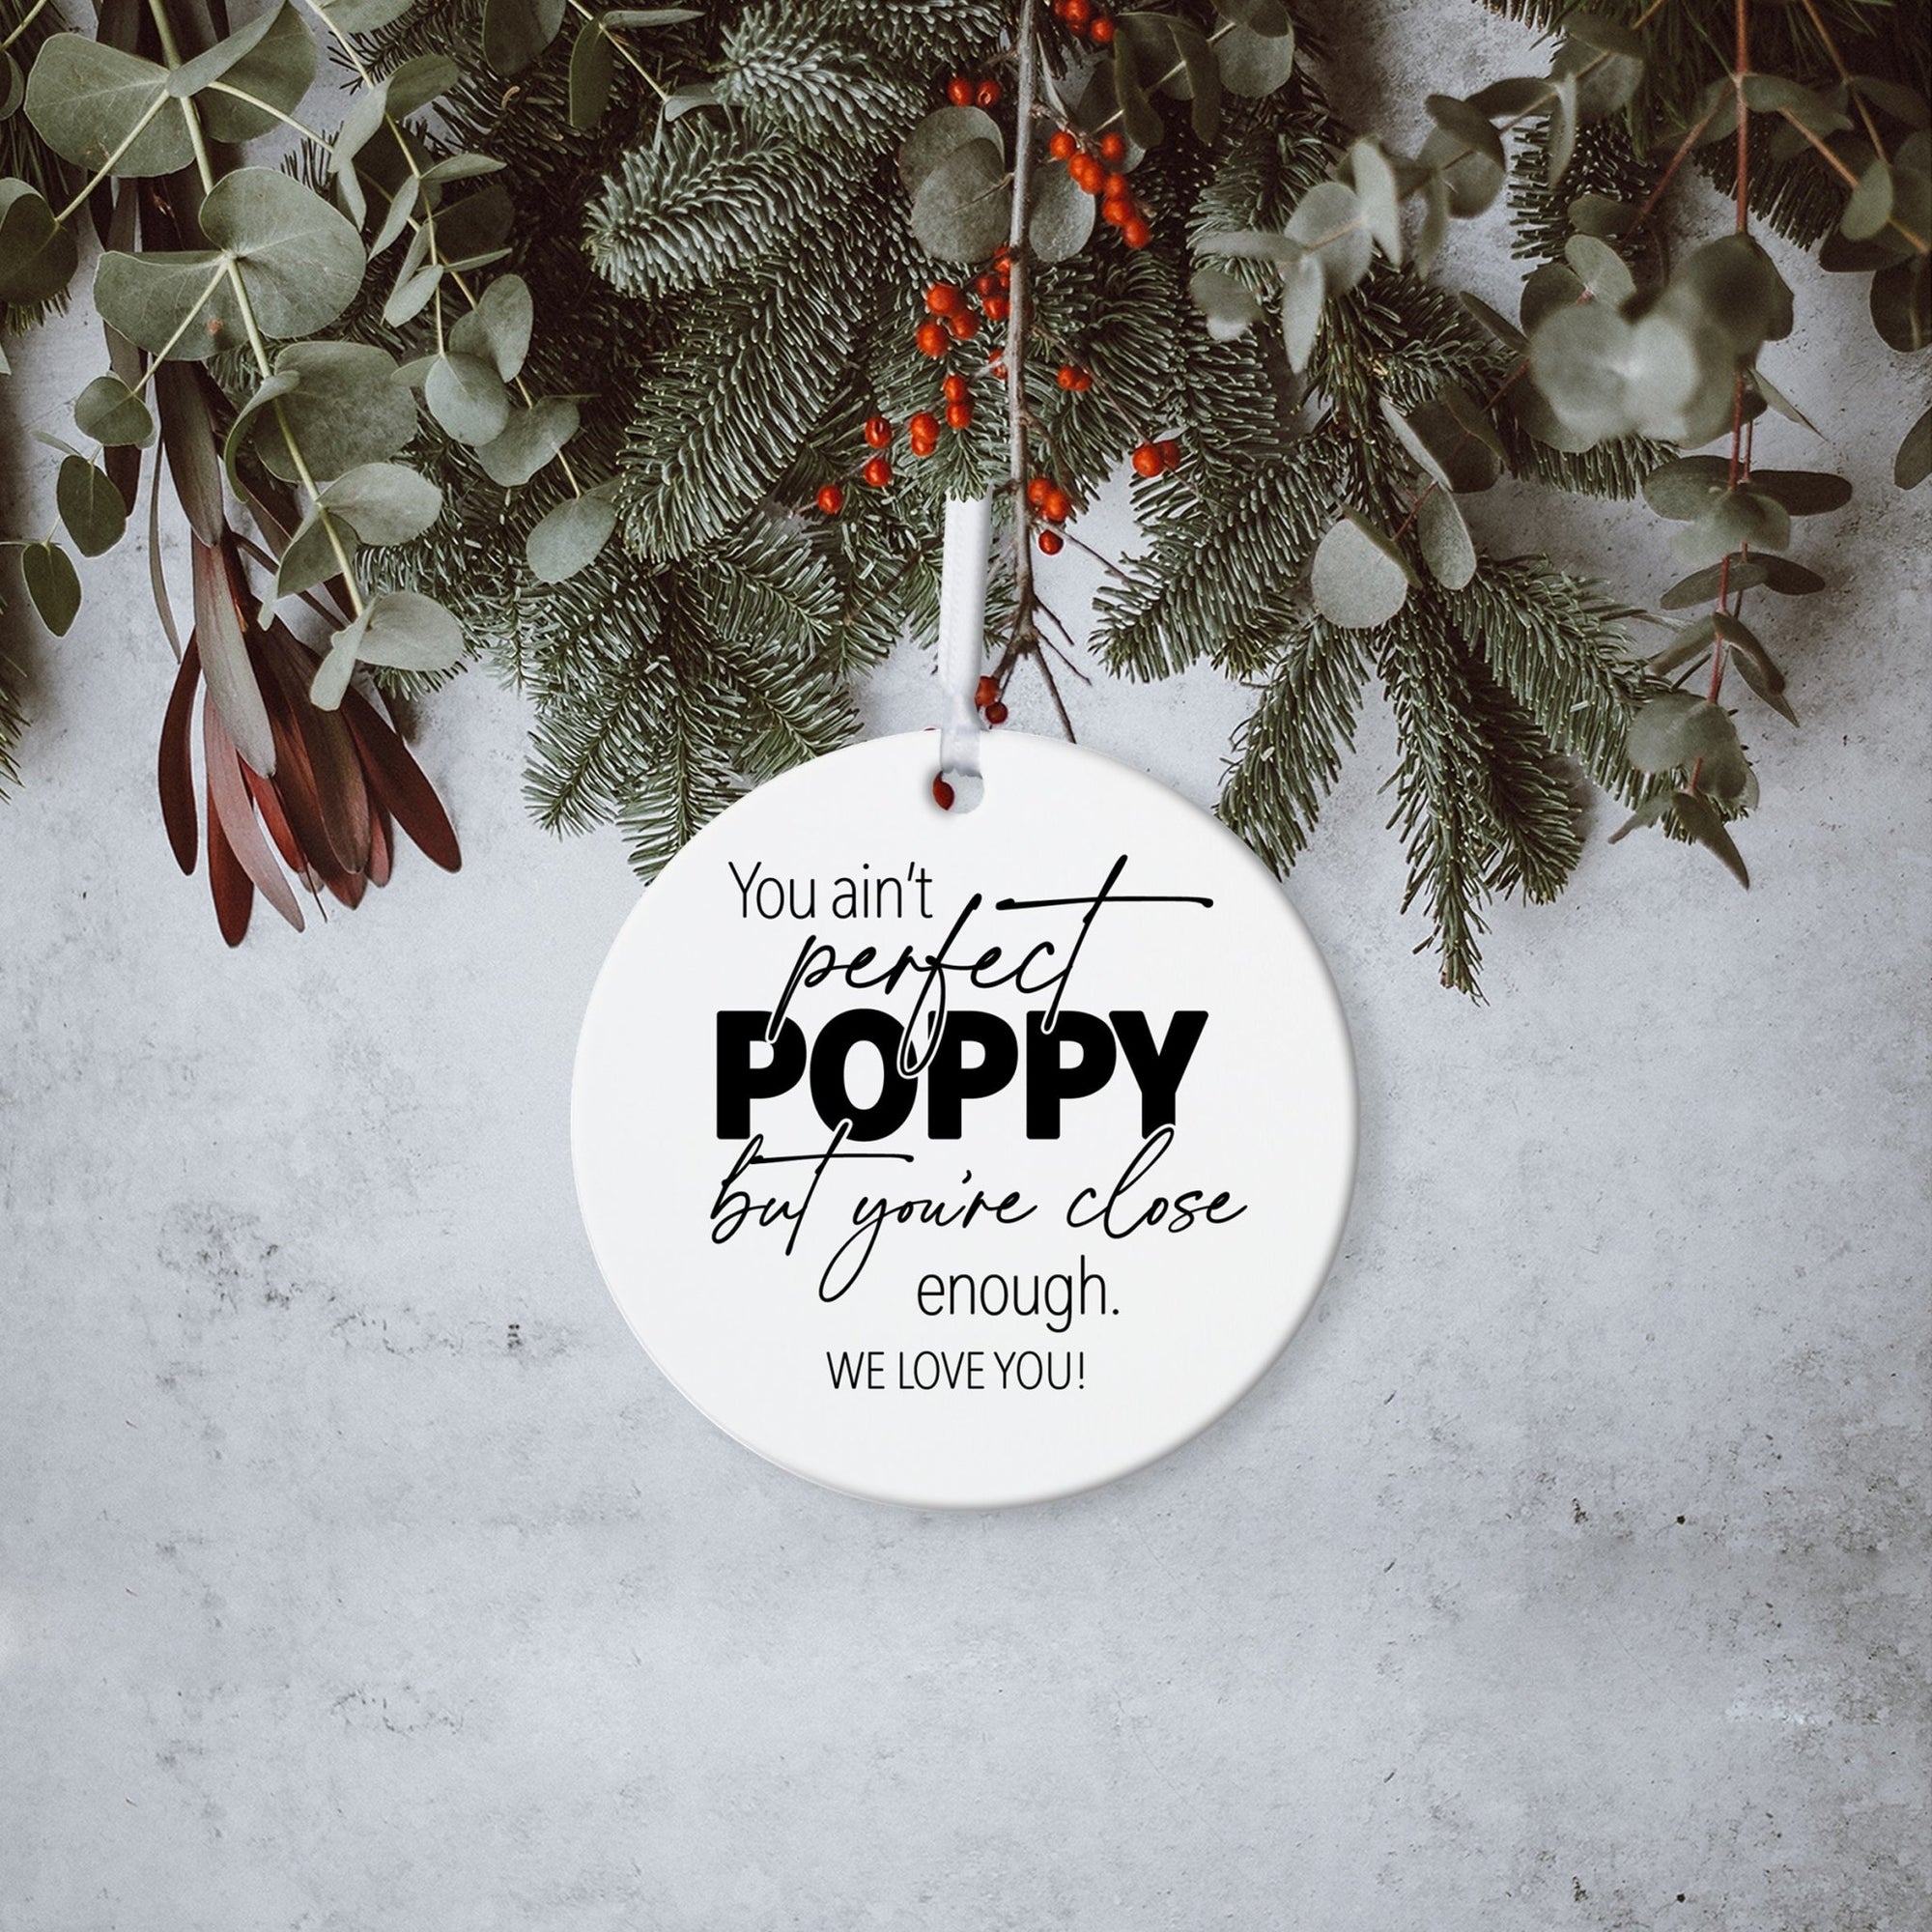 Grandparents White Ornament With Inspirational Message Gift Ideas - You Ain't Perfect Poppy - LifeSong Milestones